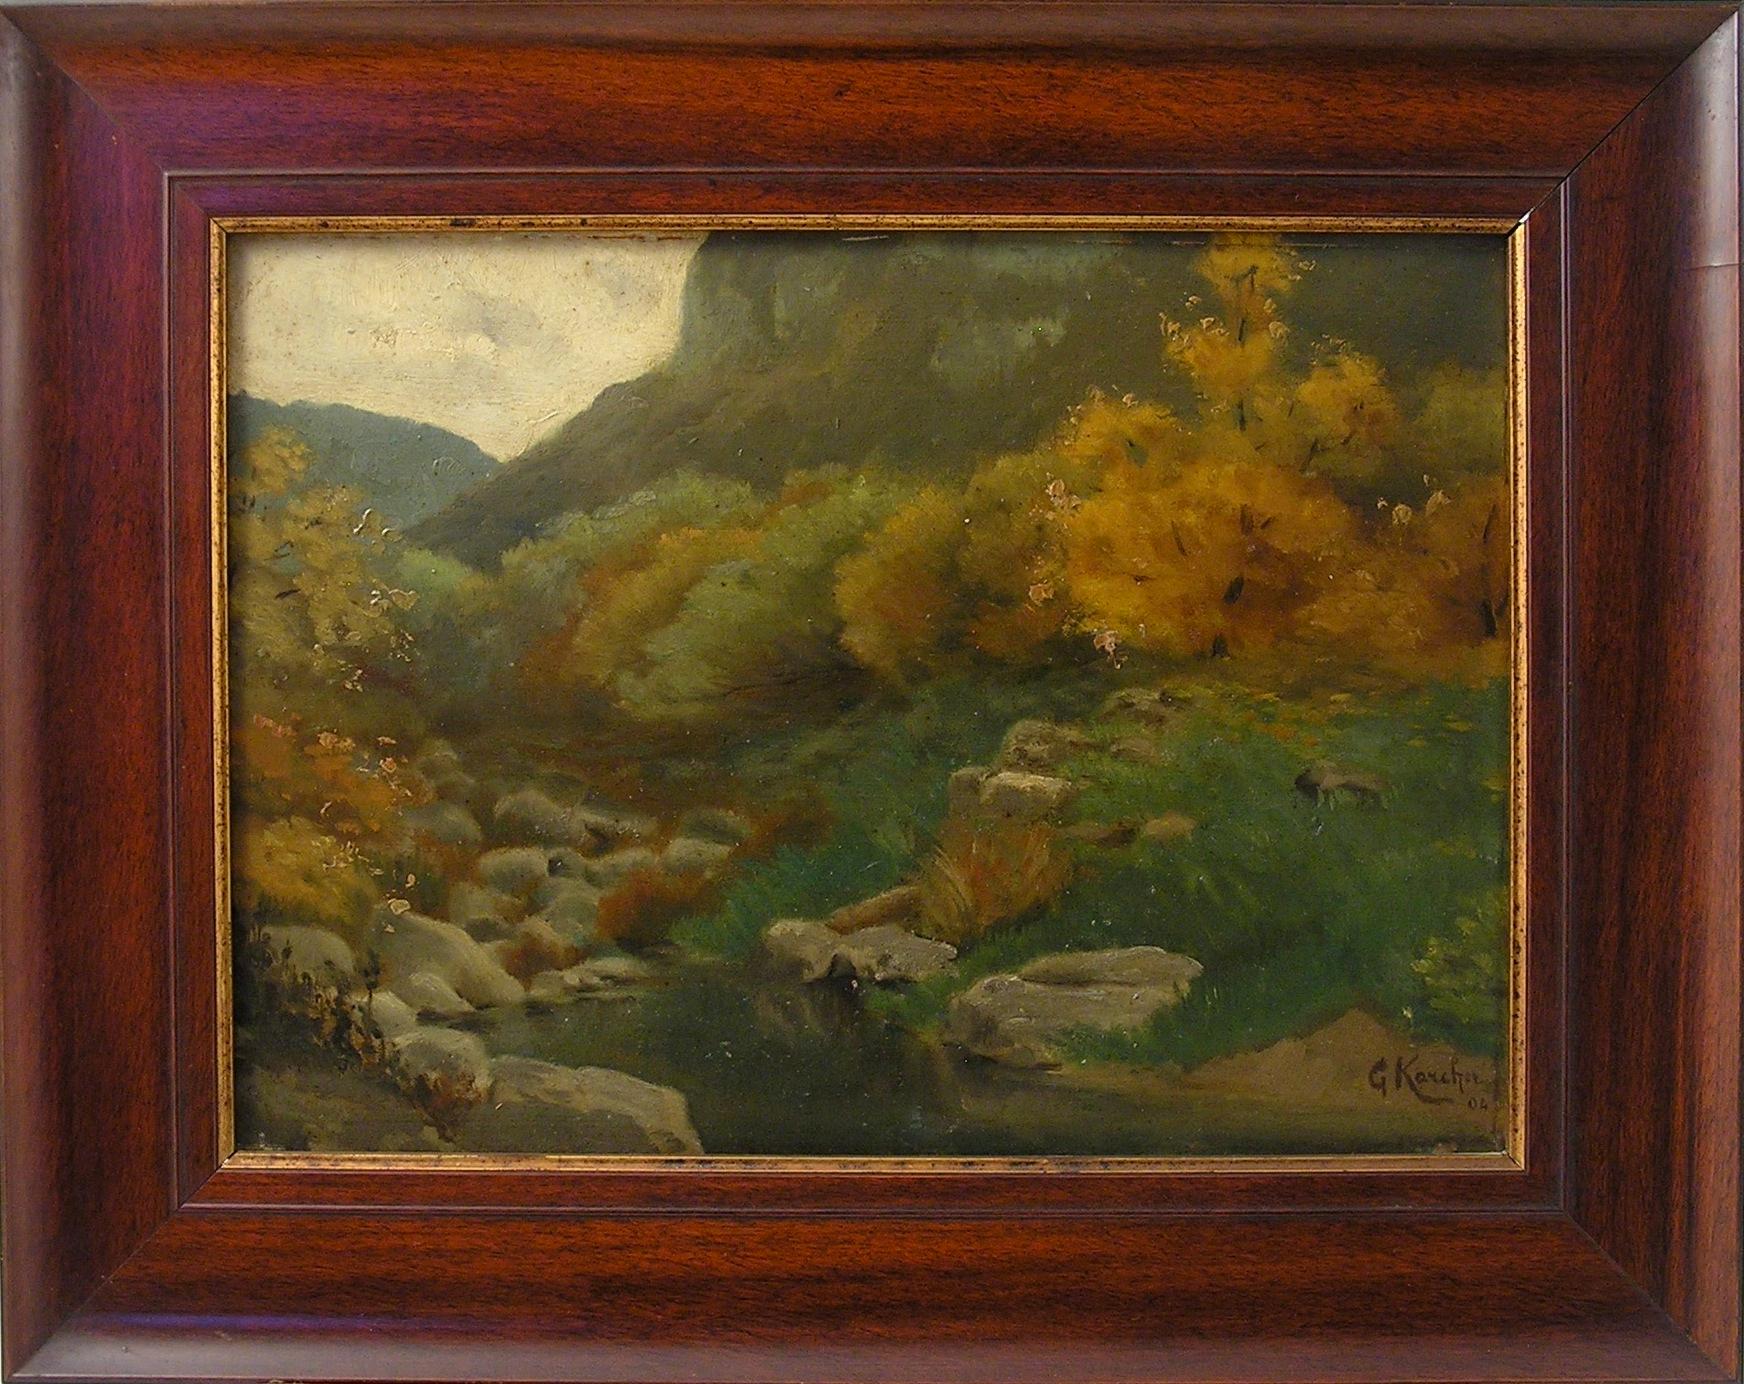 Gustave Karcher ( 1831 1908 ) Oil on Panel 1904 - Landscape with a Stream